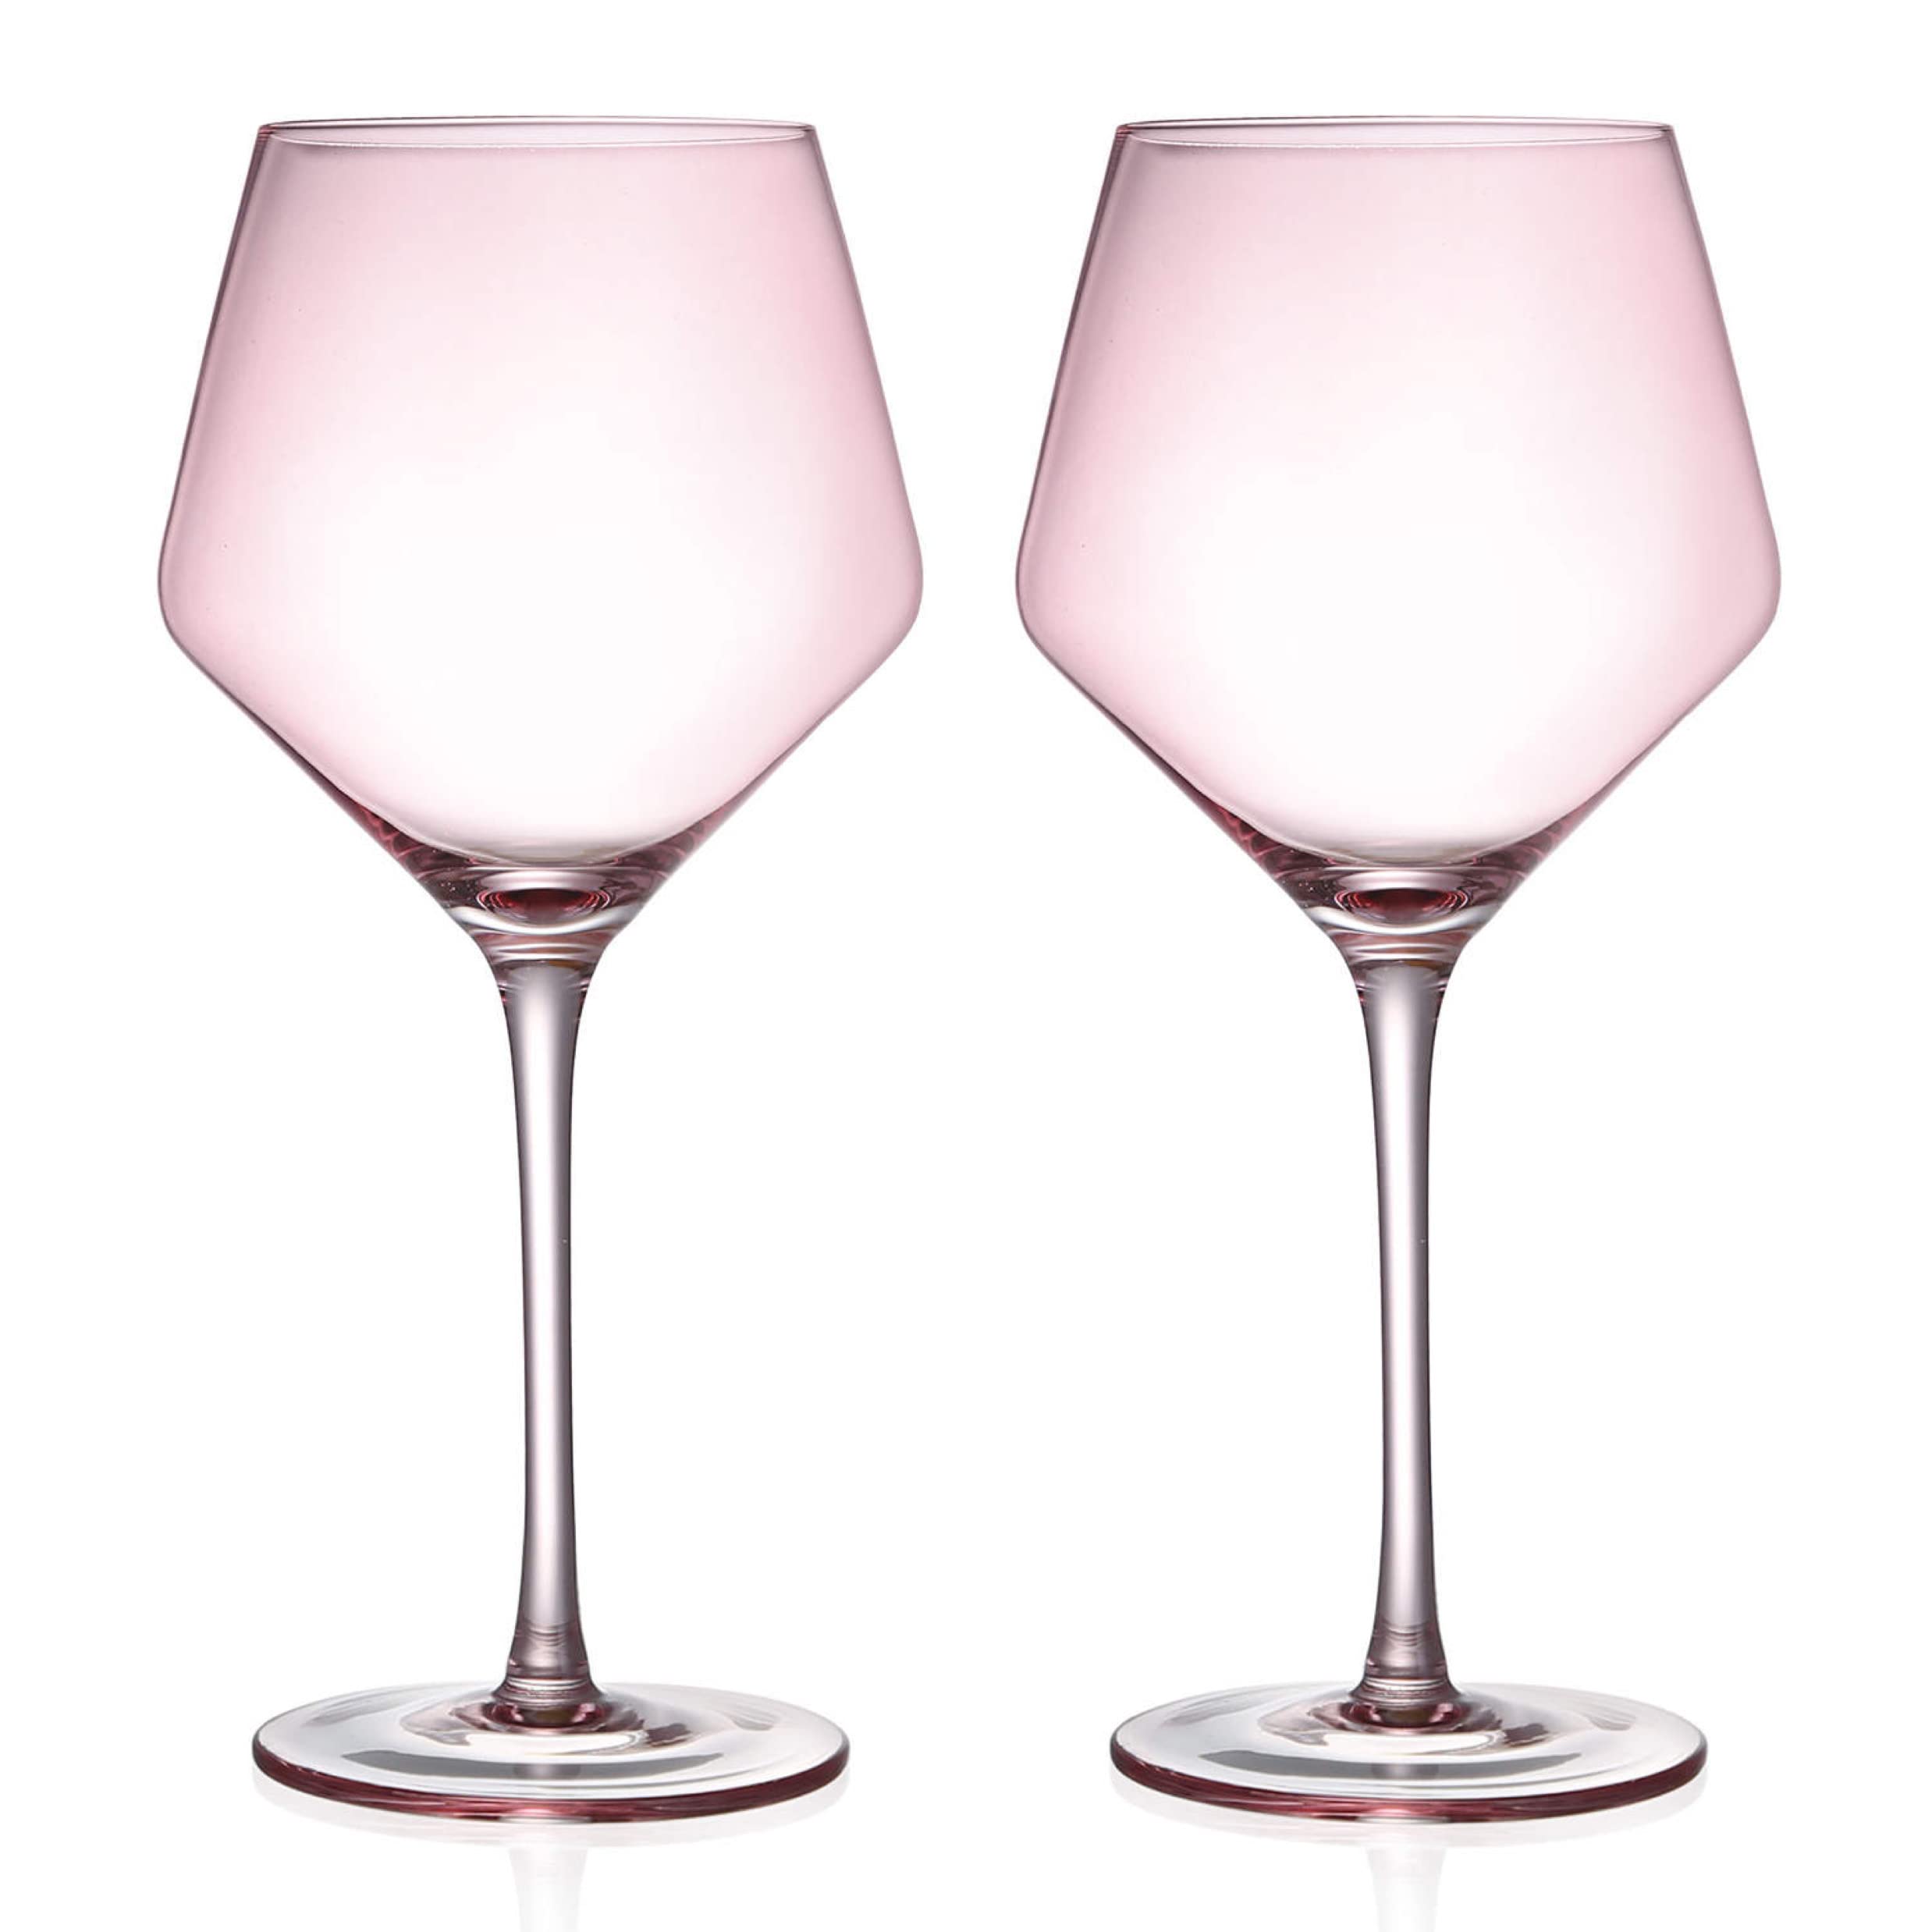 ANNIE LAURIE Pink Colored Wine Glass - Set of 2 - Large 22 oz Stemmed Glassware - Hand-Blown Crystal Glasses, White & Red Wine, Water, Cocktail - Bachelorette, Party, Celebration, Birthday